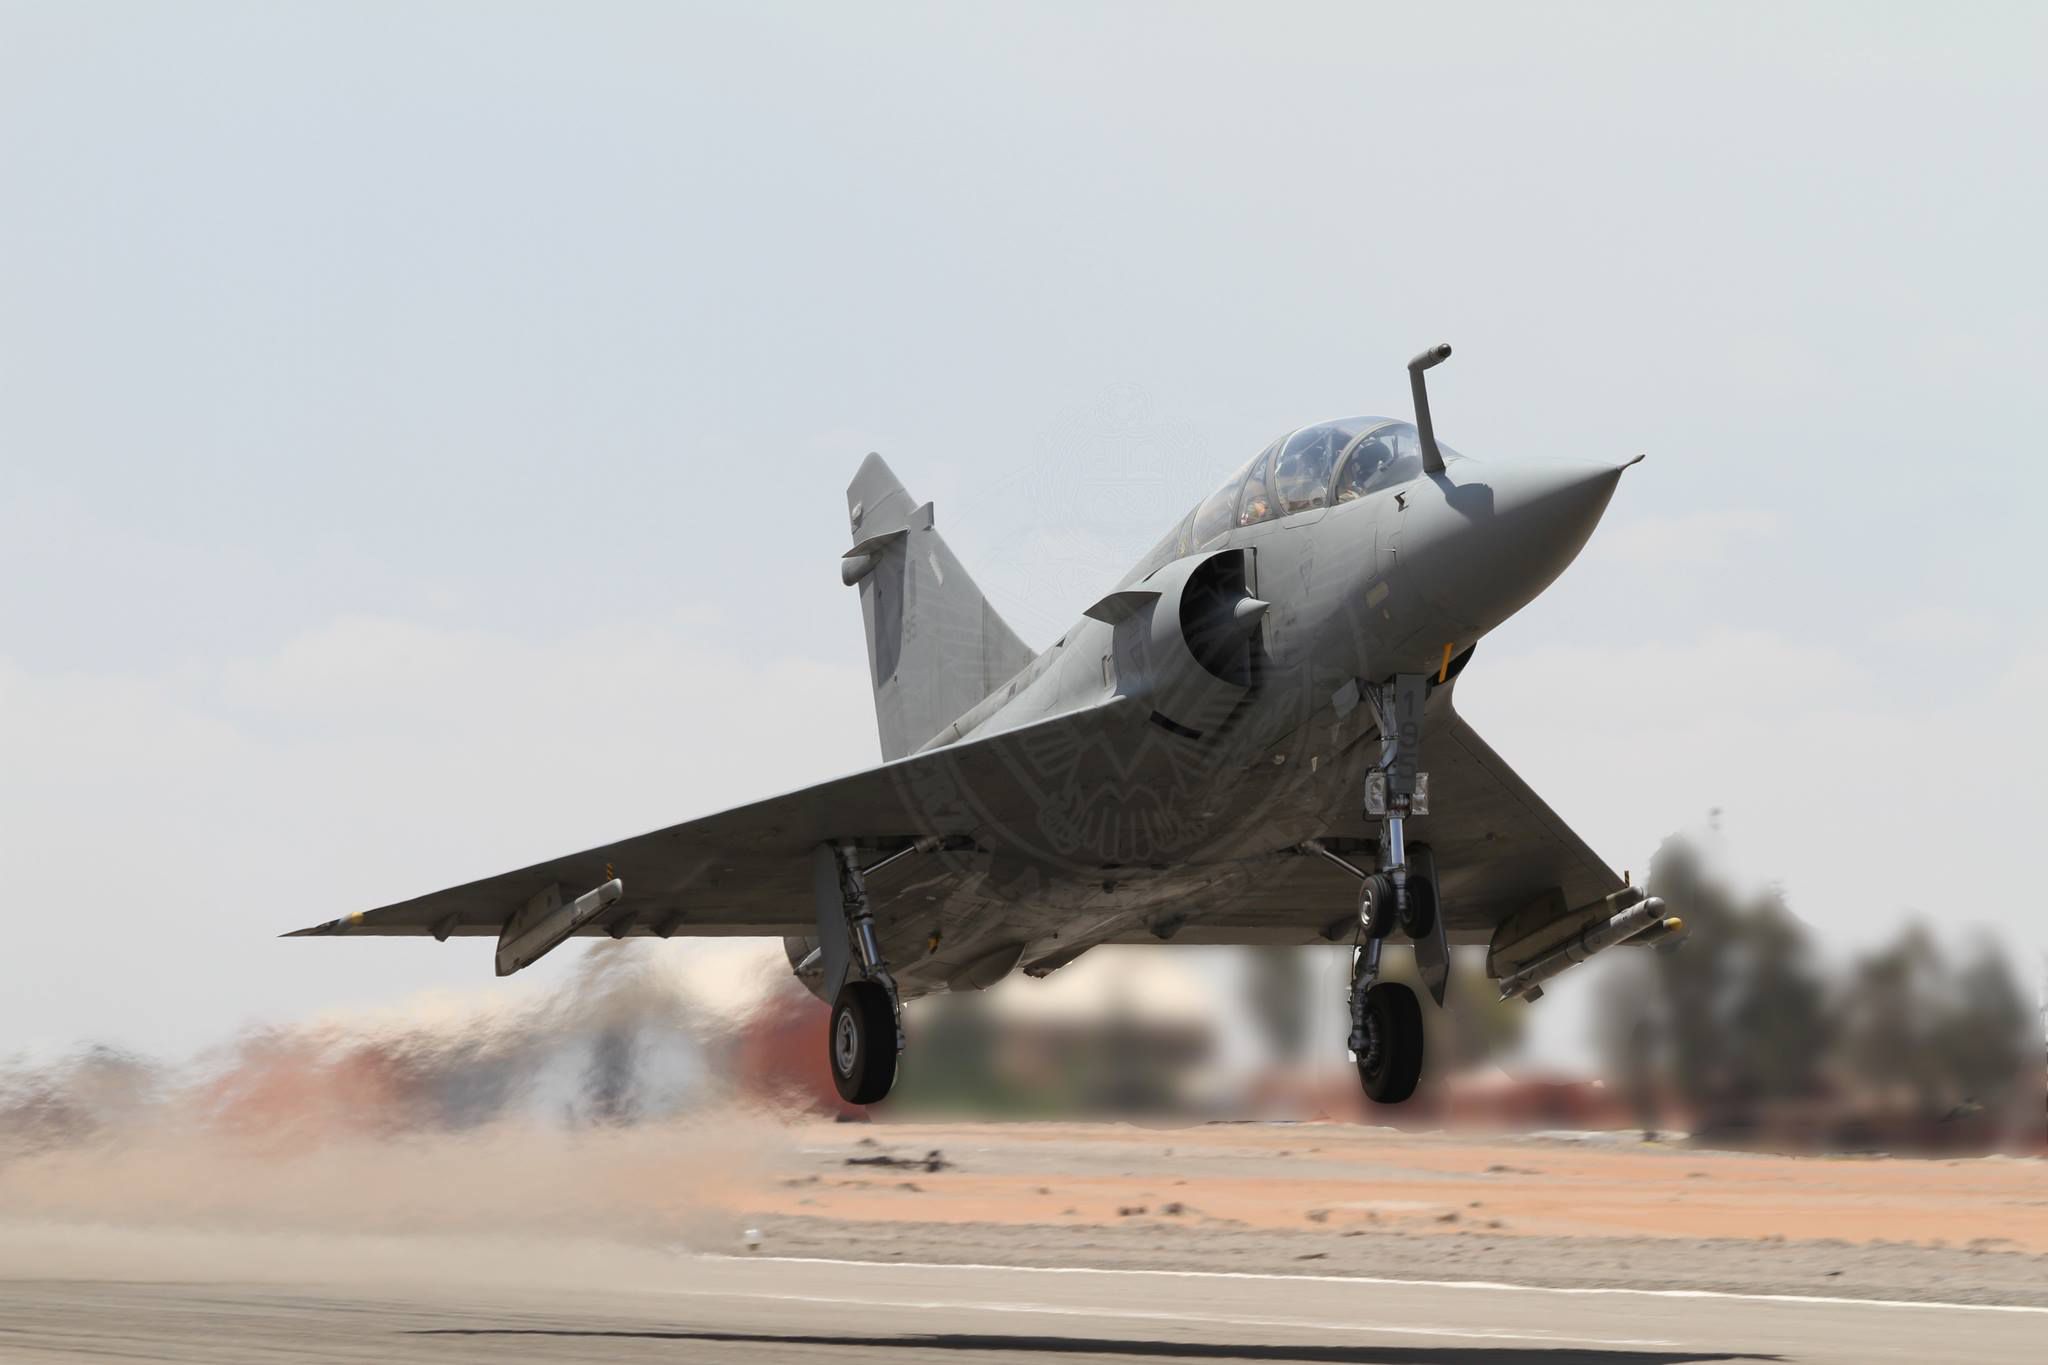 The Mirage 2000 is a fourth generation jet fighter belonging to the ranks of the Armed Air Force.  (FAP)